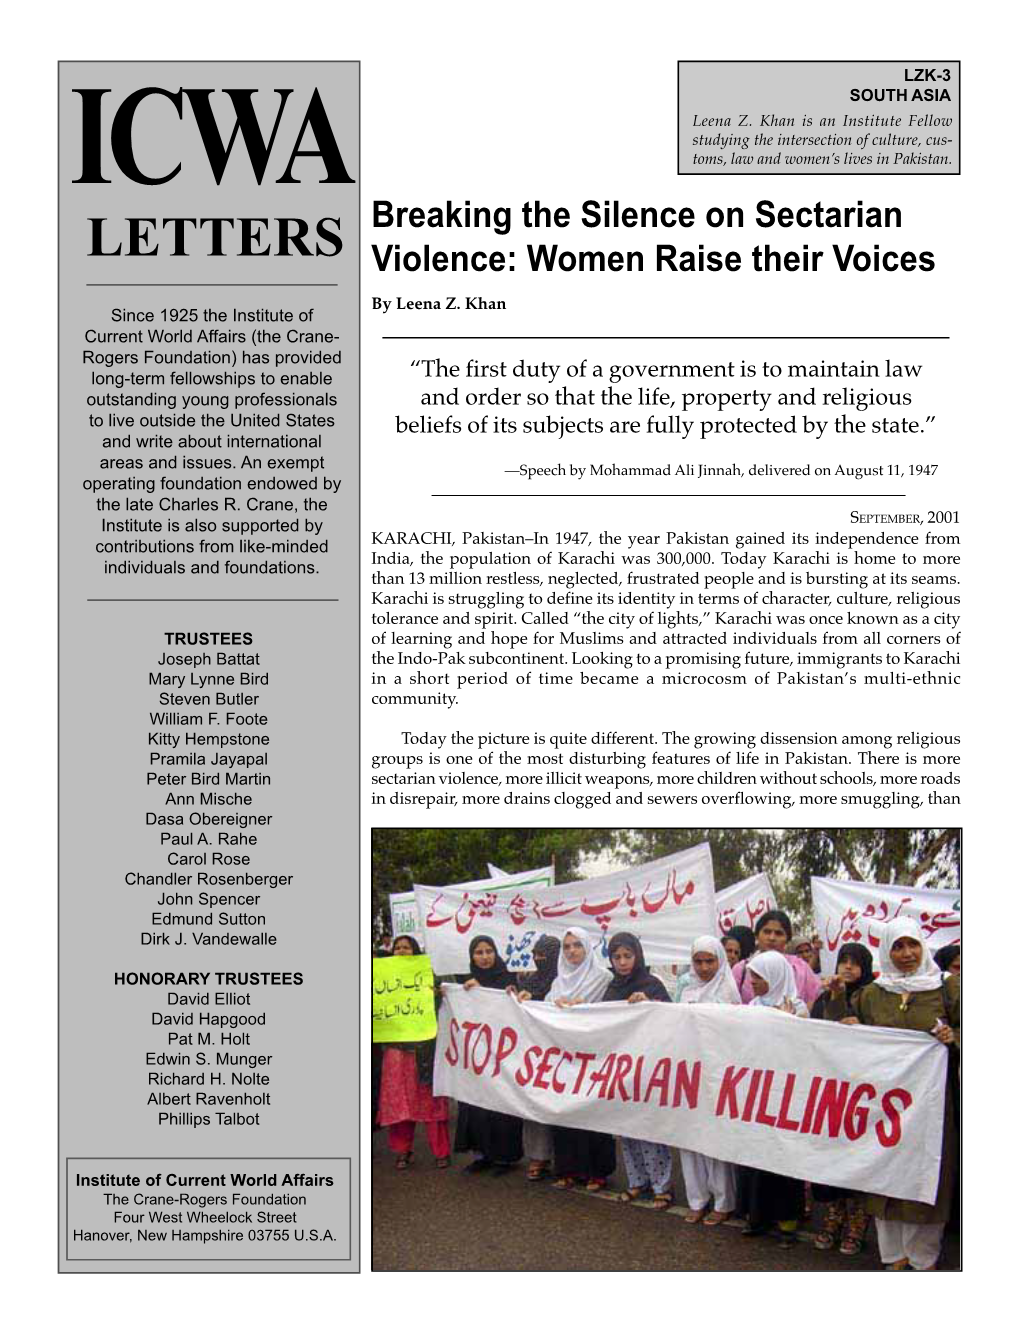 Breaking the Silence on Sectarian Violence